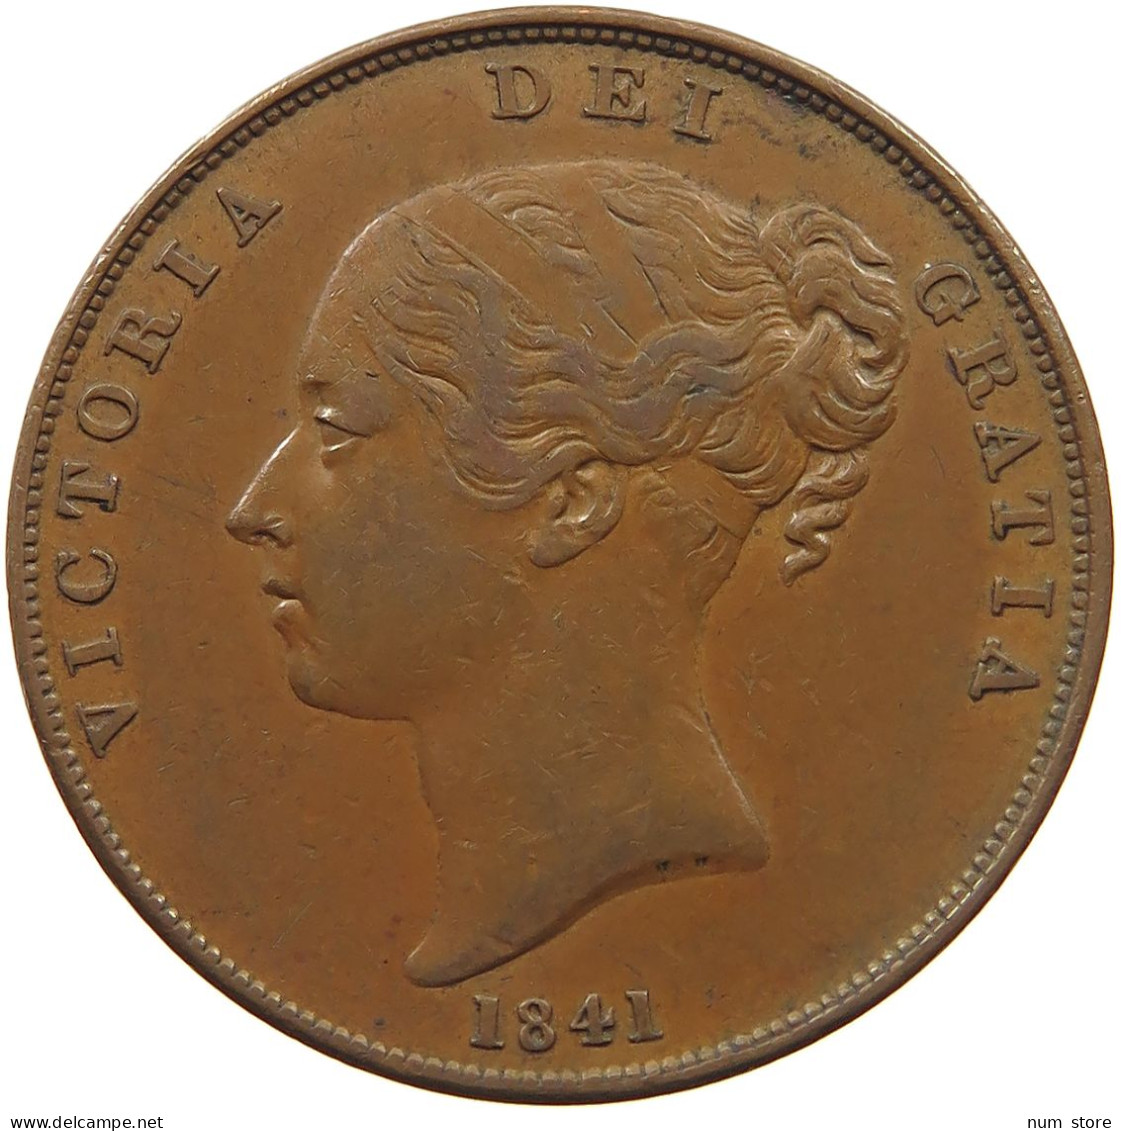 GREAT BRITAIN PENNY 1841 VICTORIA 1837-1901 #MA 022967 - D. 1 Penny